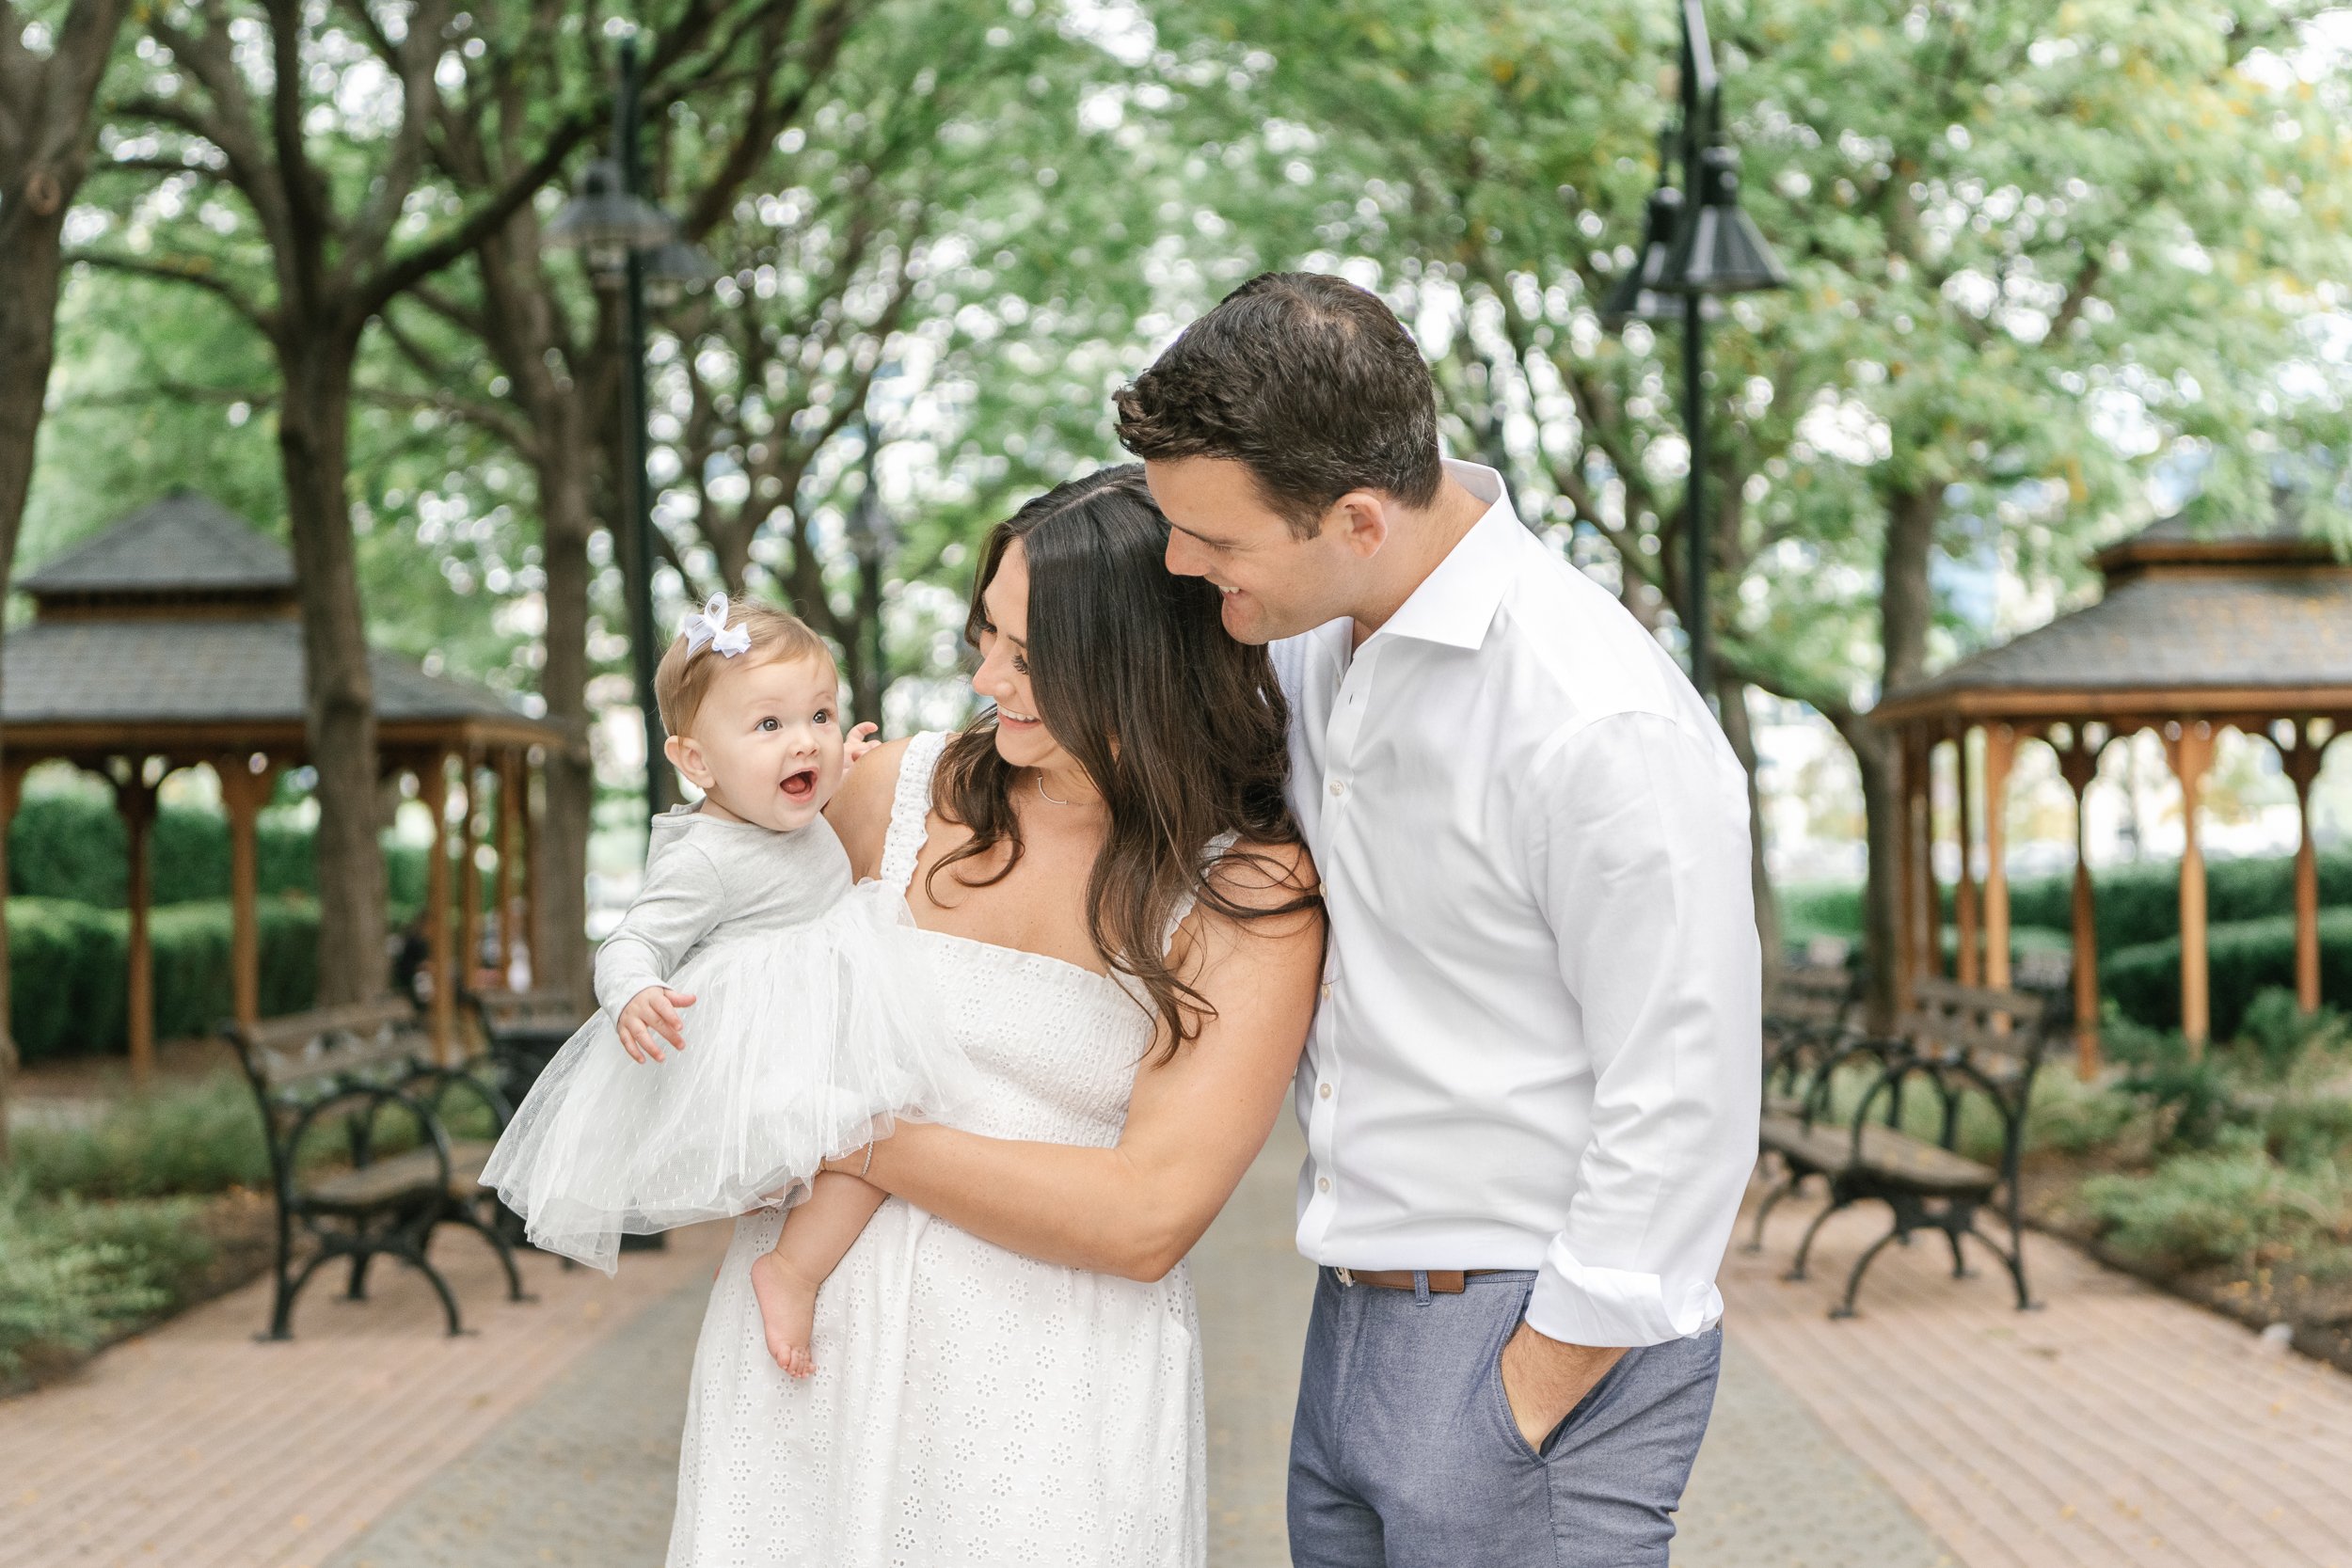  In New Jersey, Nicole Hawkins Photography captures a young family of three in a green park. New Jersey family photography Hoboken photos #nicolehawkinsphotography #newjerseyphotographers #familyphotographer #6monthportraits #NJfamilyphotos 